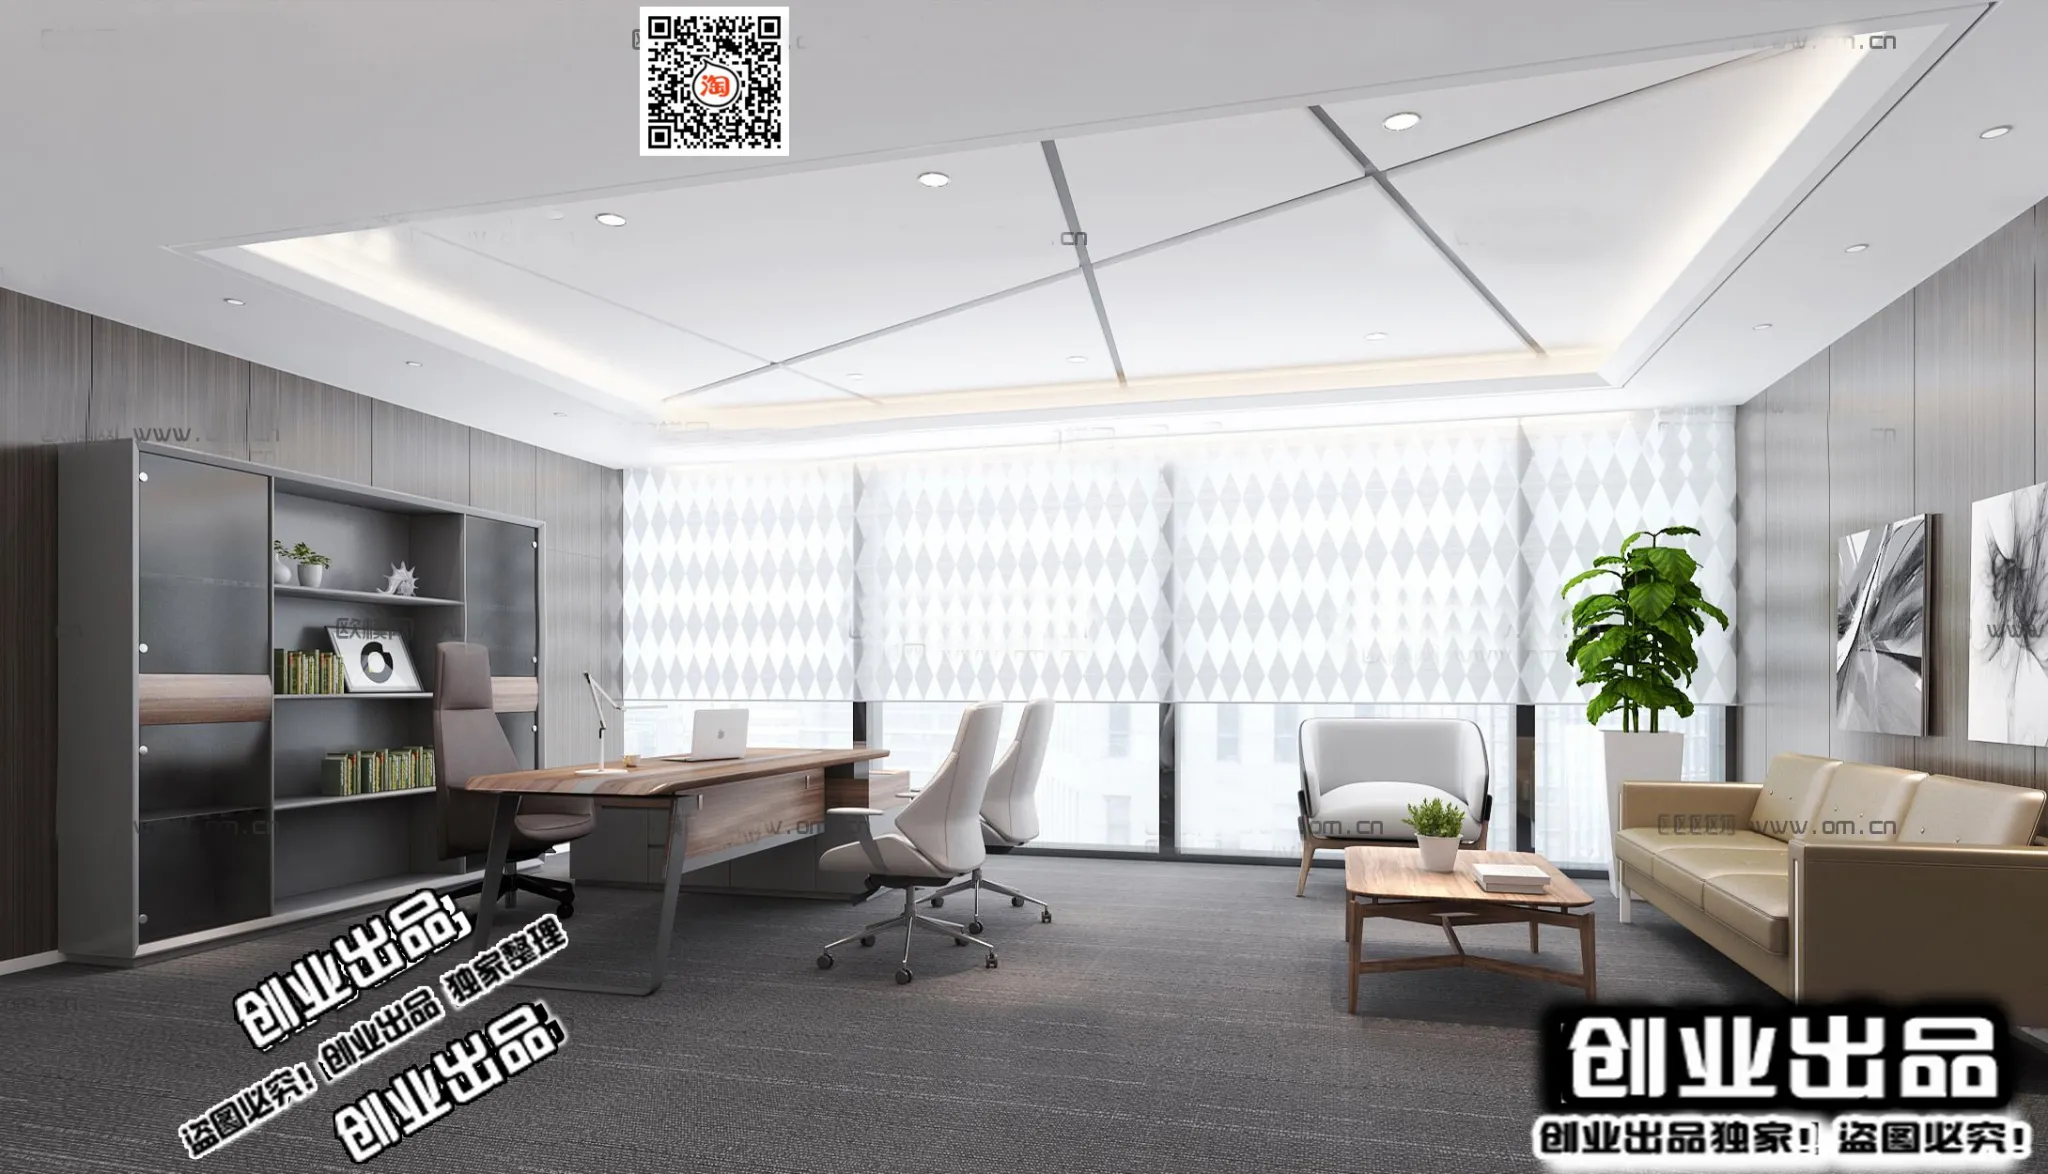 3D OFFICE INTERIOR (VRAY) – MANAGER ROOM 3D SCENES – 140